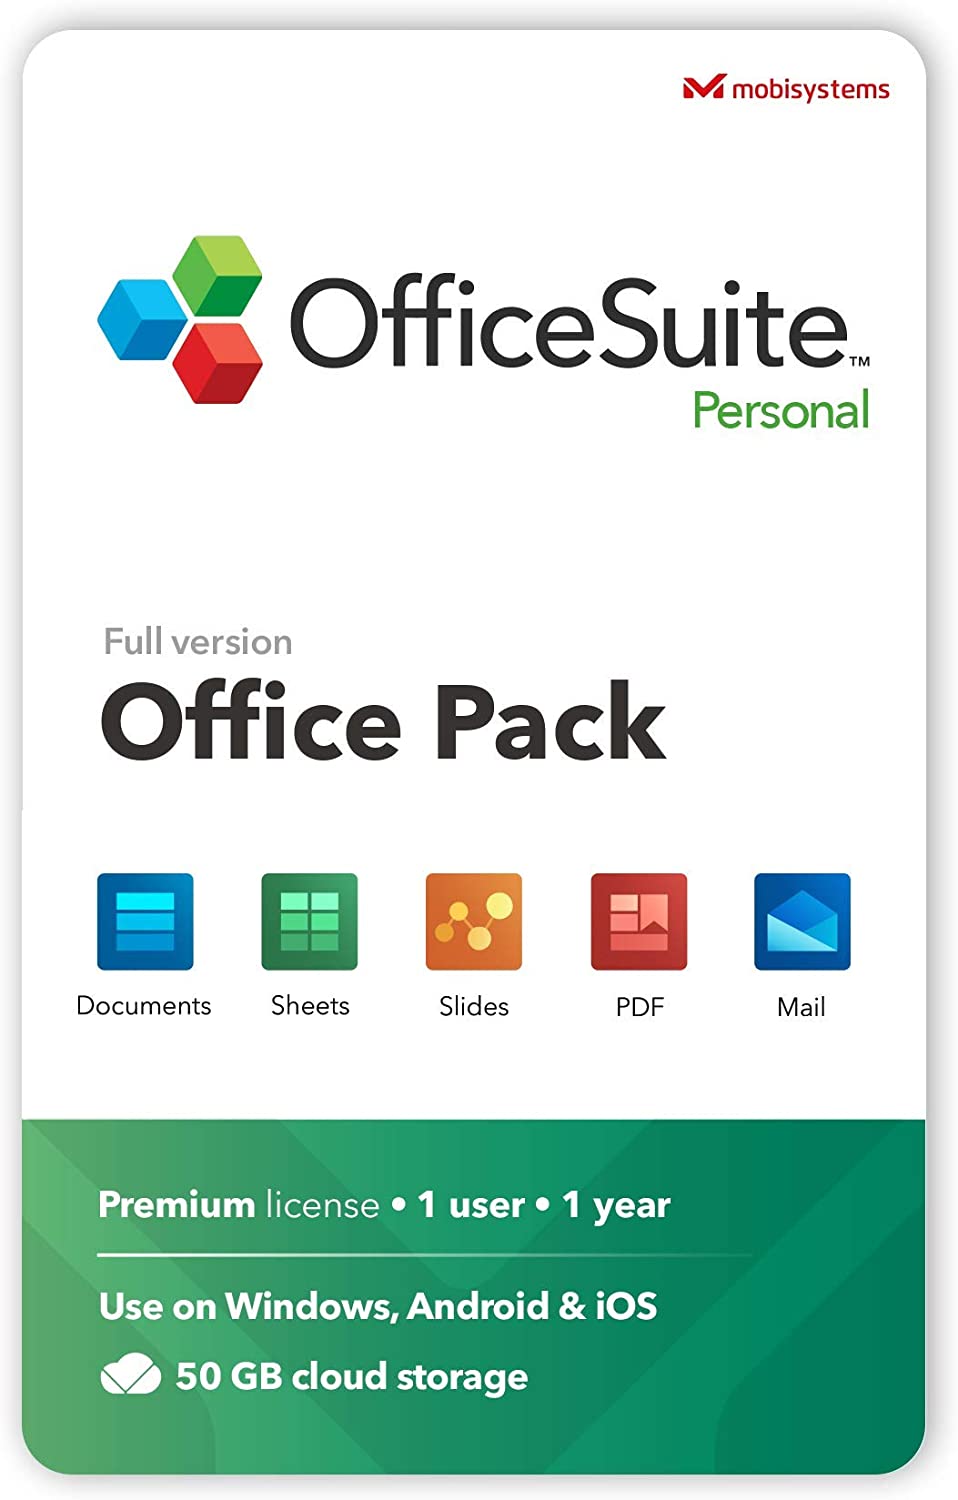 OfficeSuite Personal Compatible with Microsoft Office Word Excel & PowerPoint & Adobe PDF